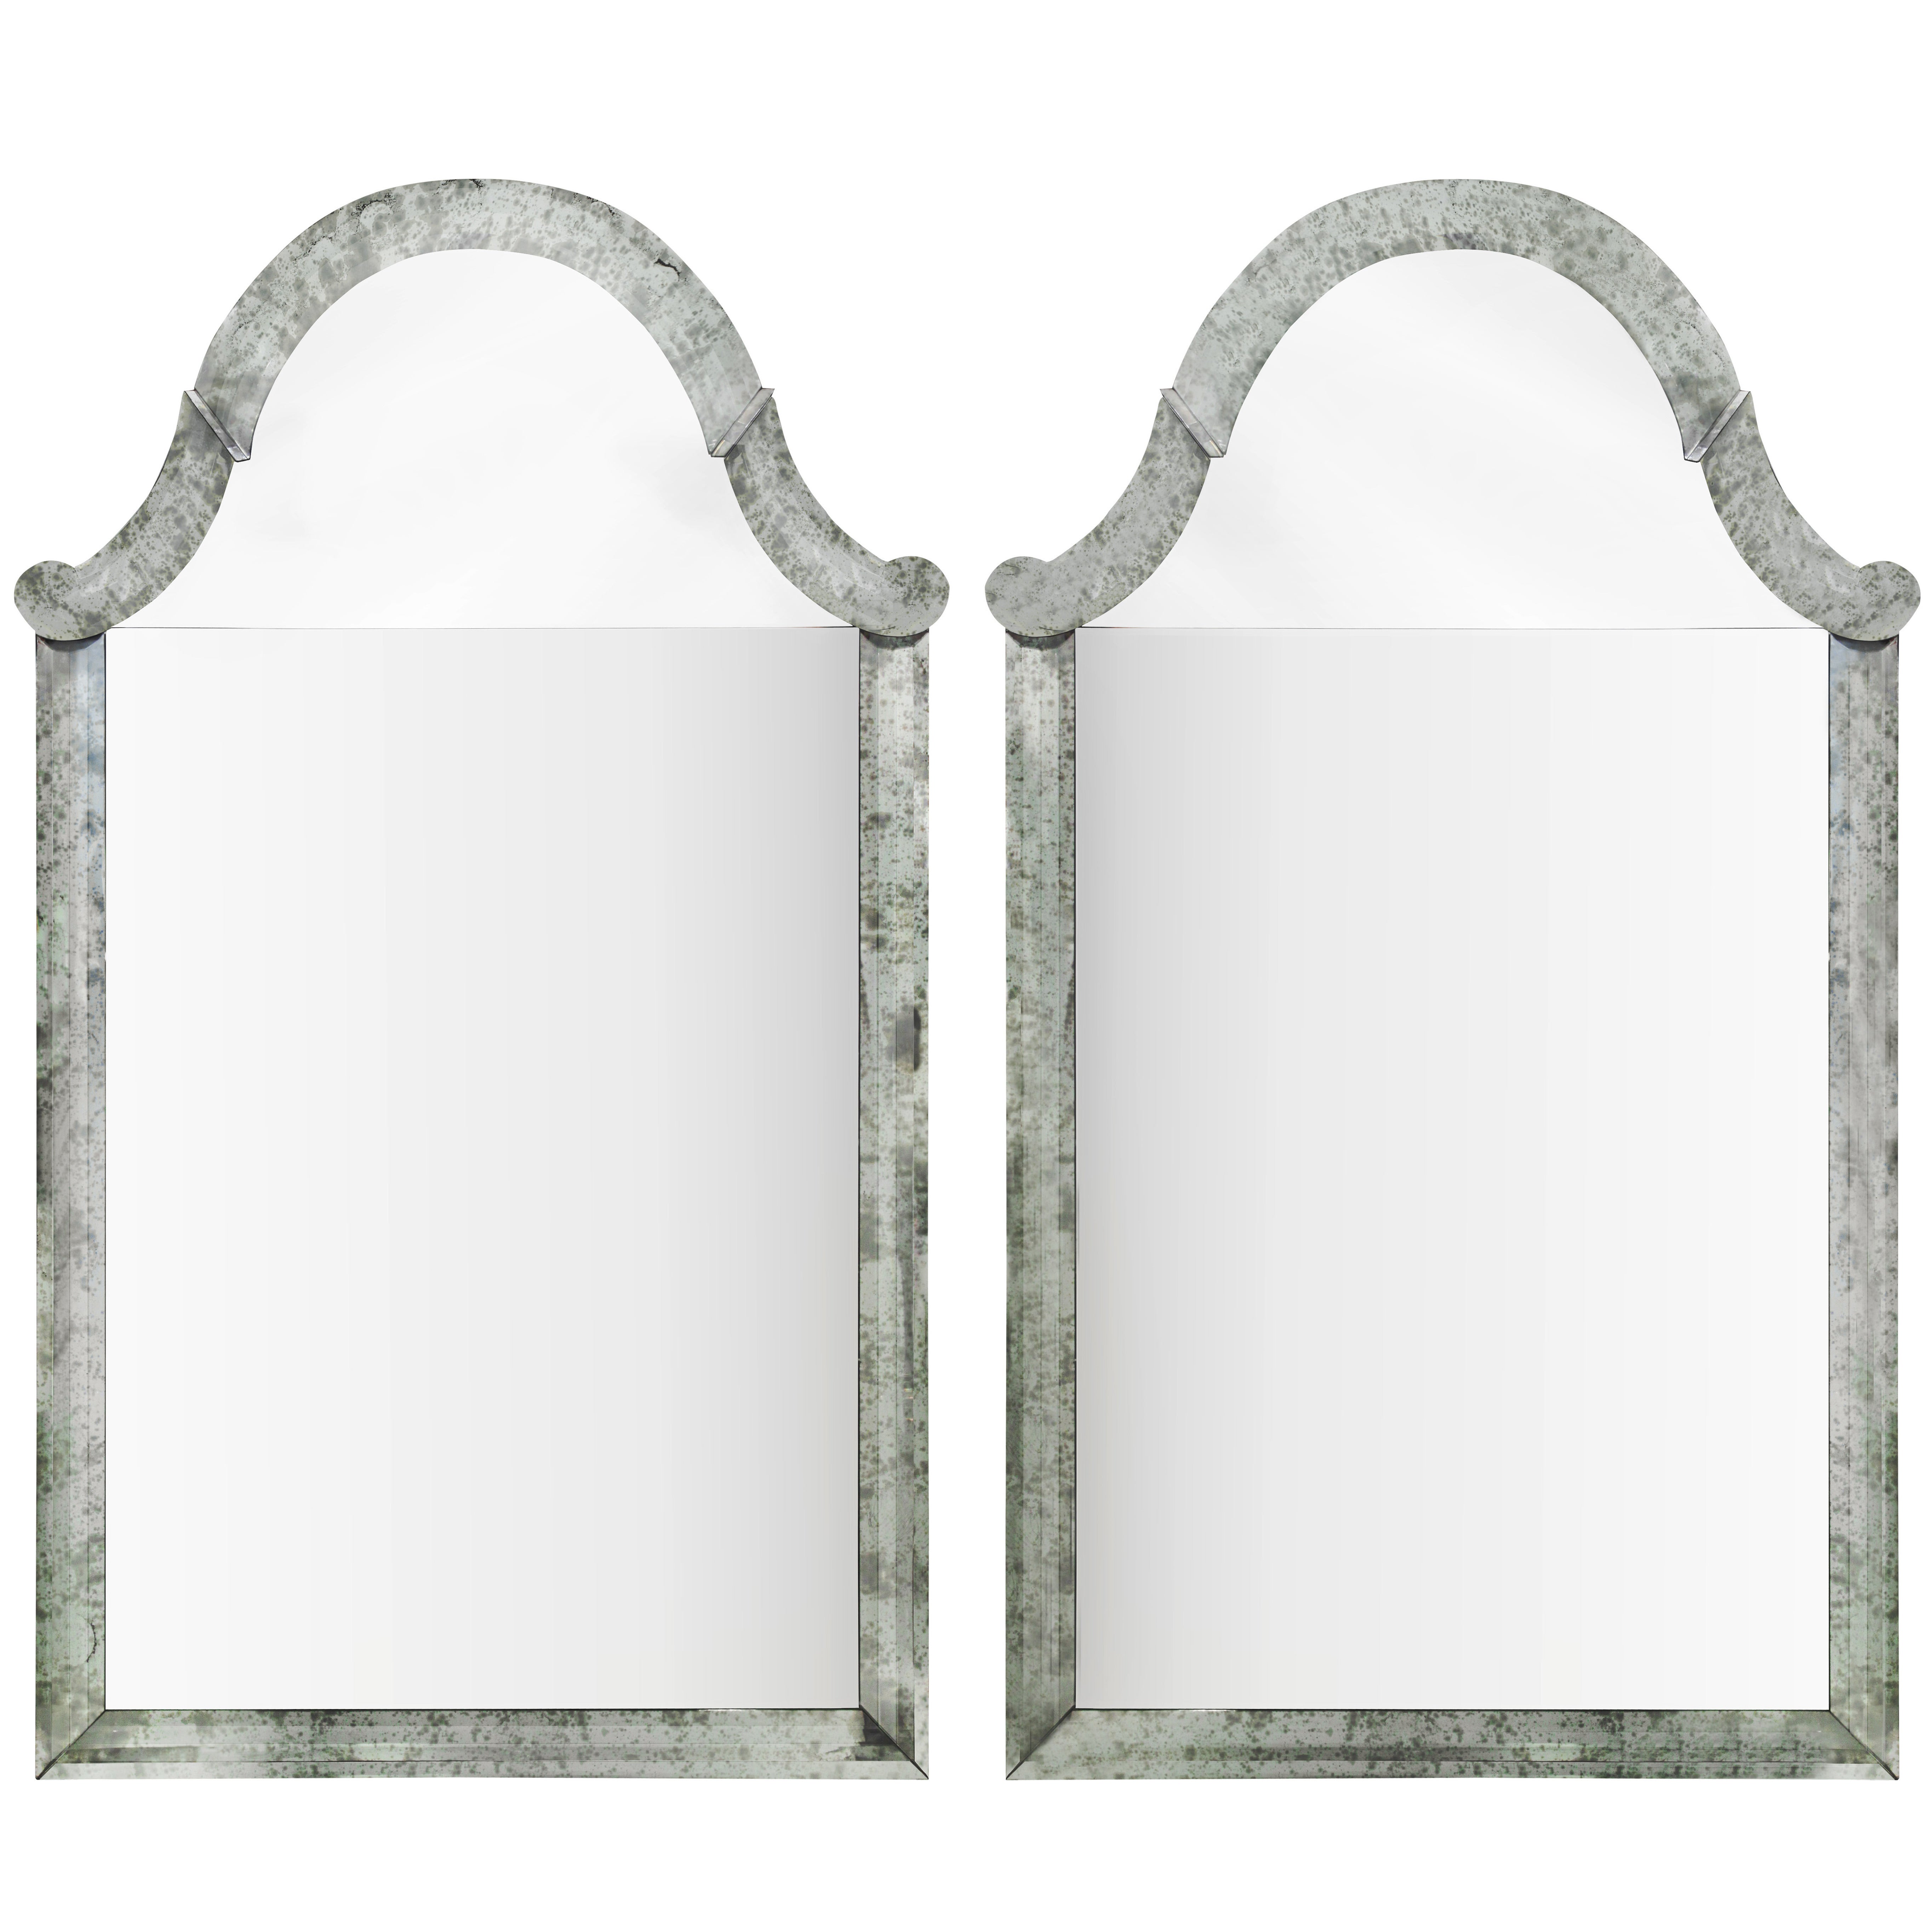 Pair of Monumental Mirrors with Antiqued Silvered Frames